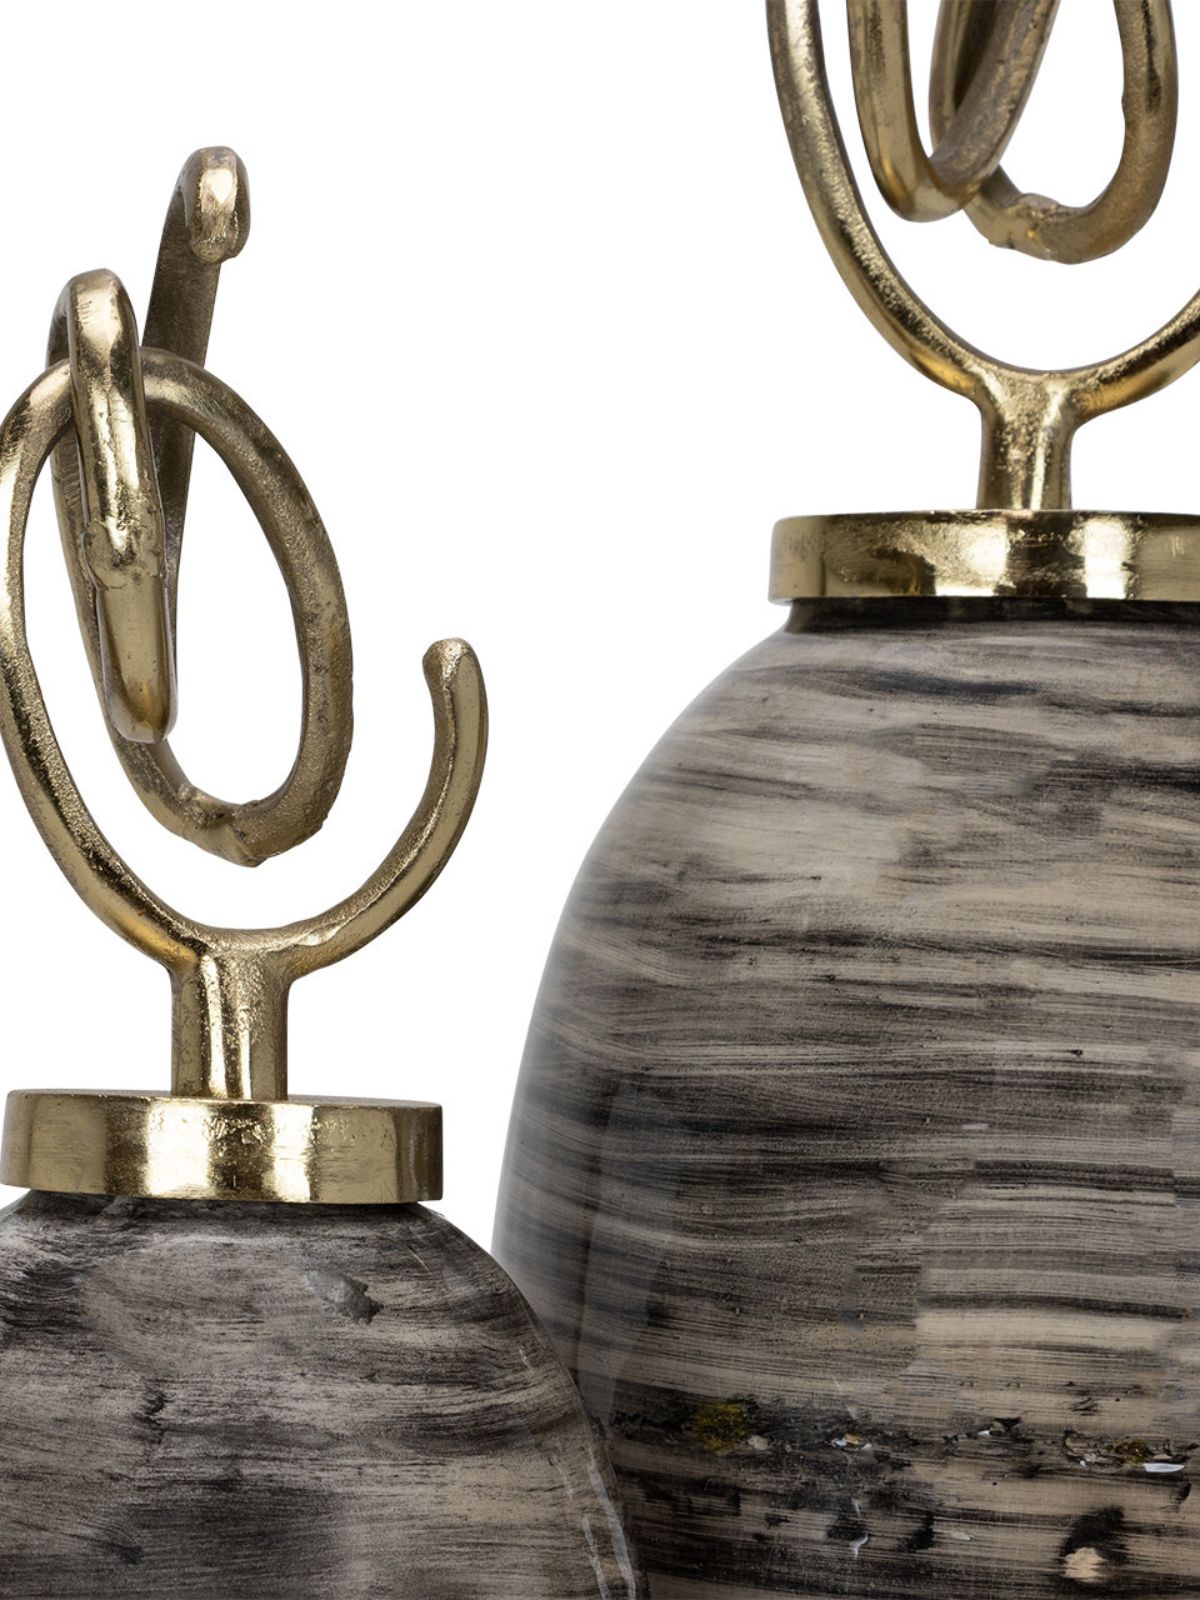 Set of 2 Trophy Ceramic With Marble Design Jars and Gold Metal Lid - KYA Home Decor. 